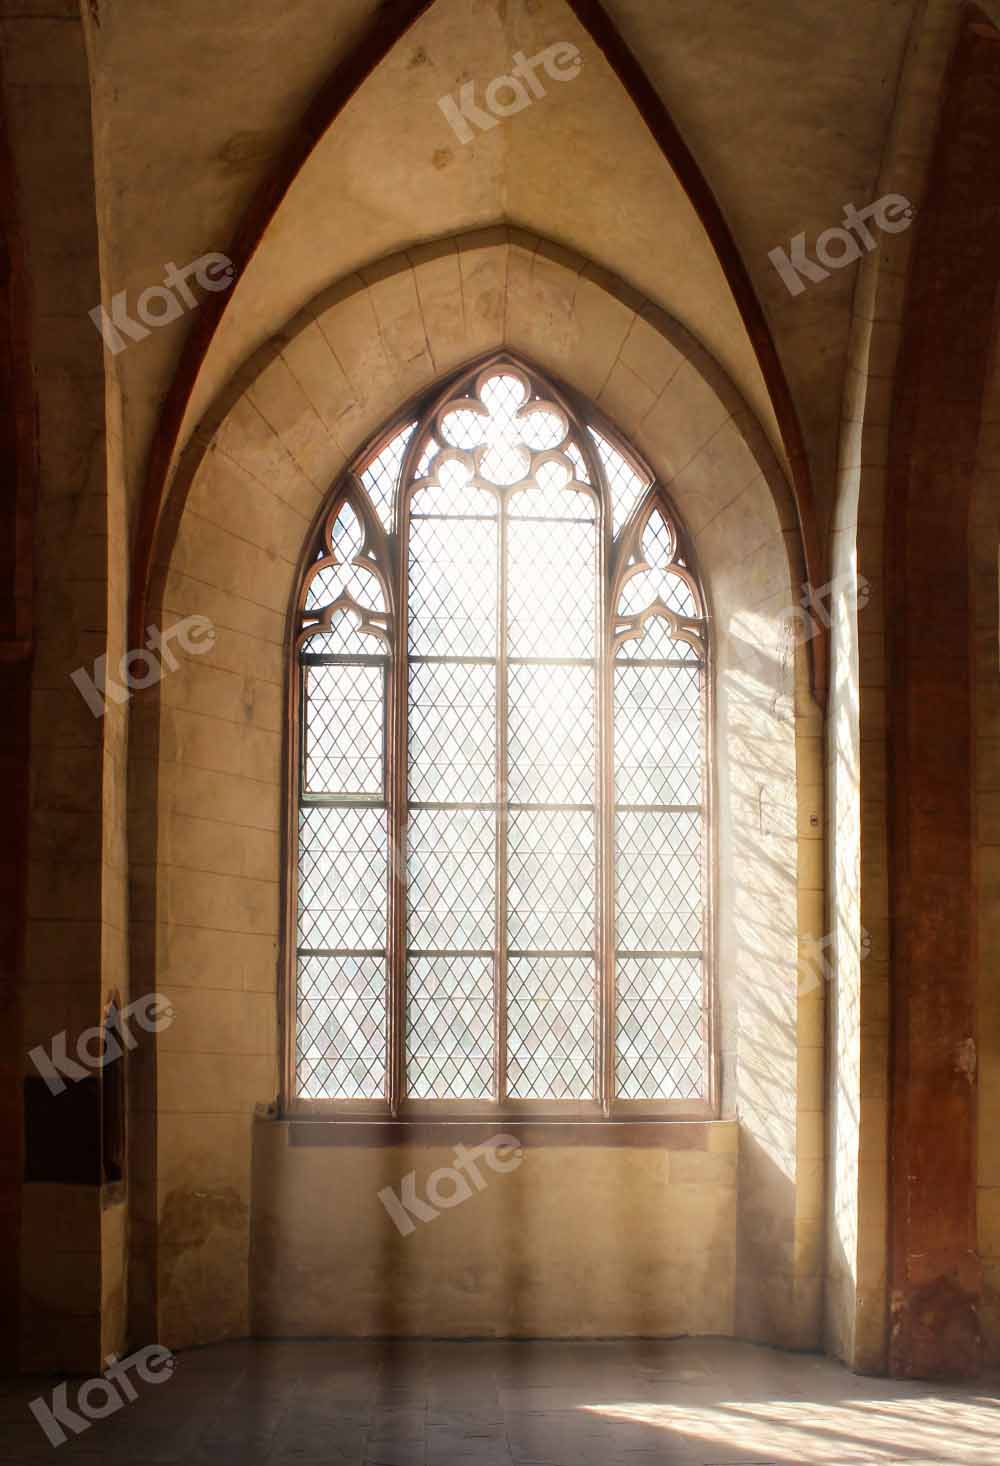 Kate Church Sunlight Backdrop Window Designed by Chain Photography